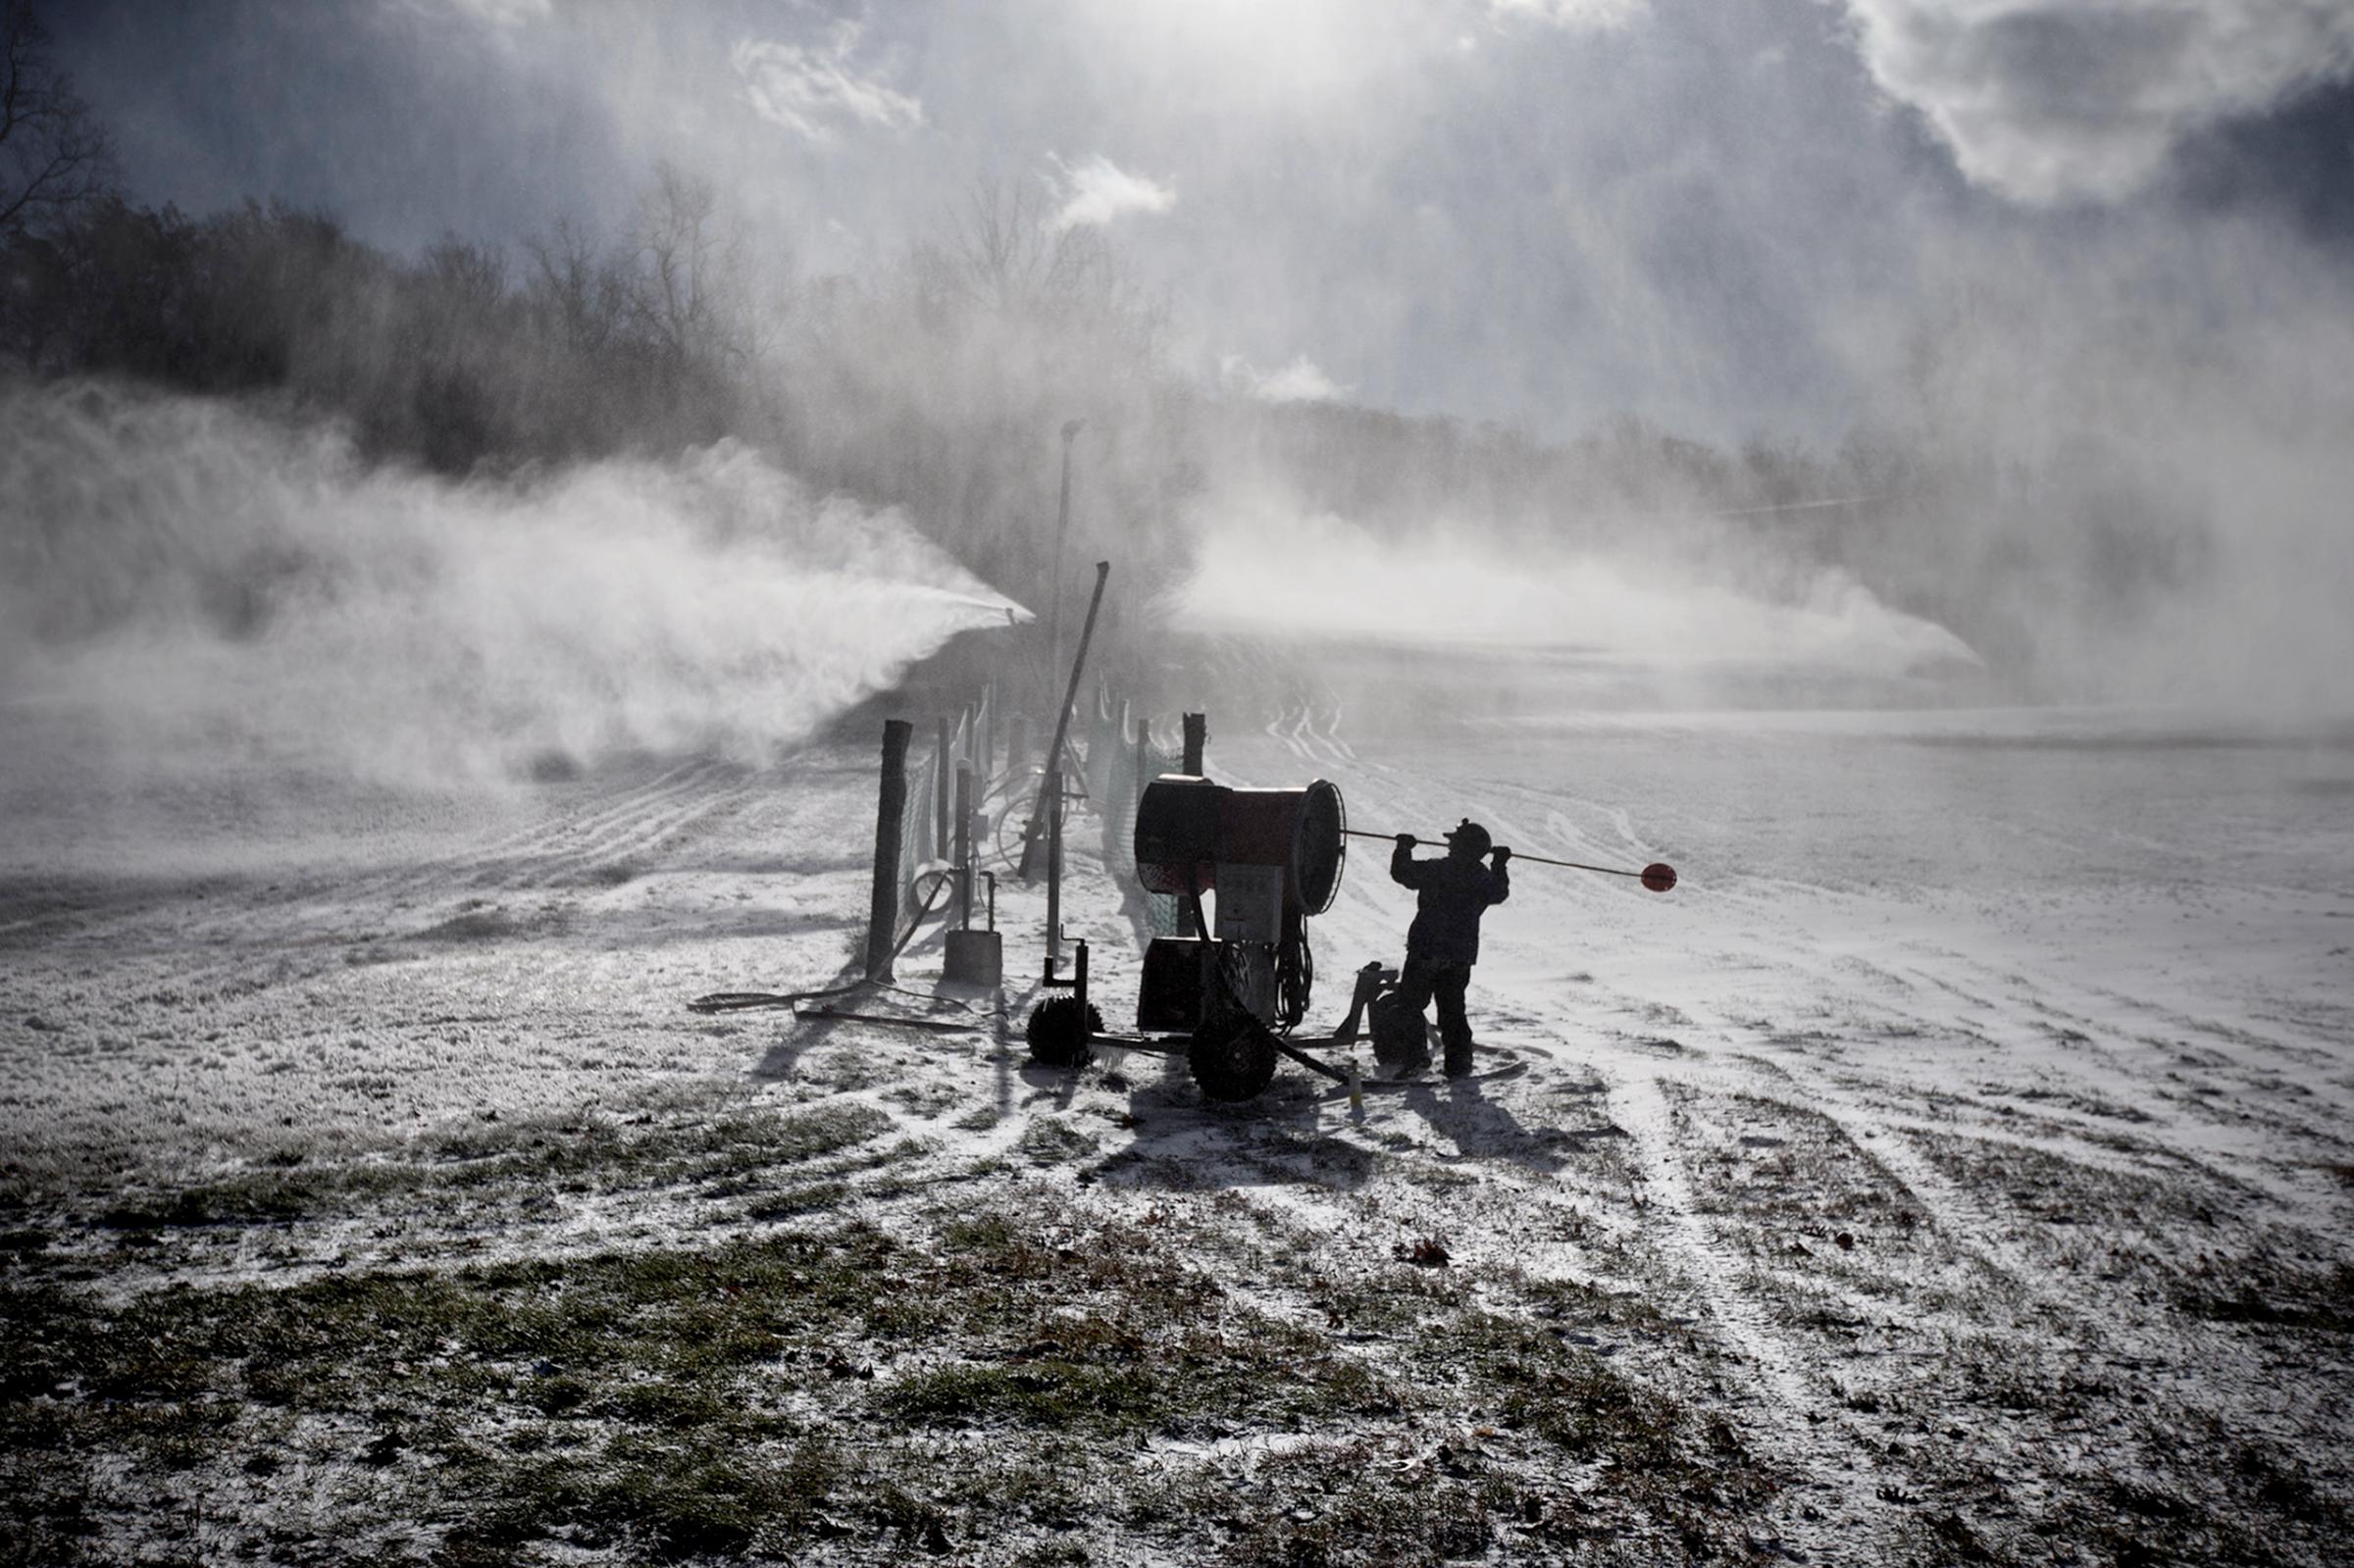 A Roundtop Mountain Resort employee makes snow in Lewisberry, Pa. on Nov. 18, 2014, as arctic air arrived in the mid state area with temperatures struggling to reach 30 degrees.